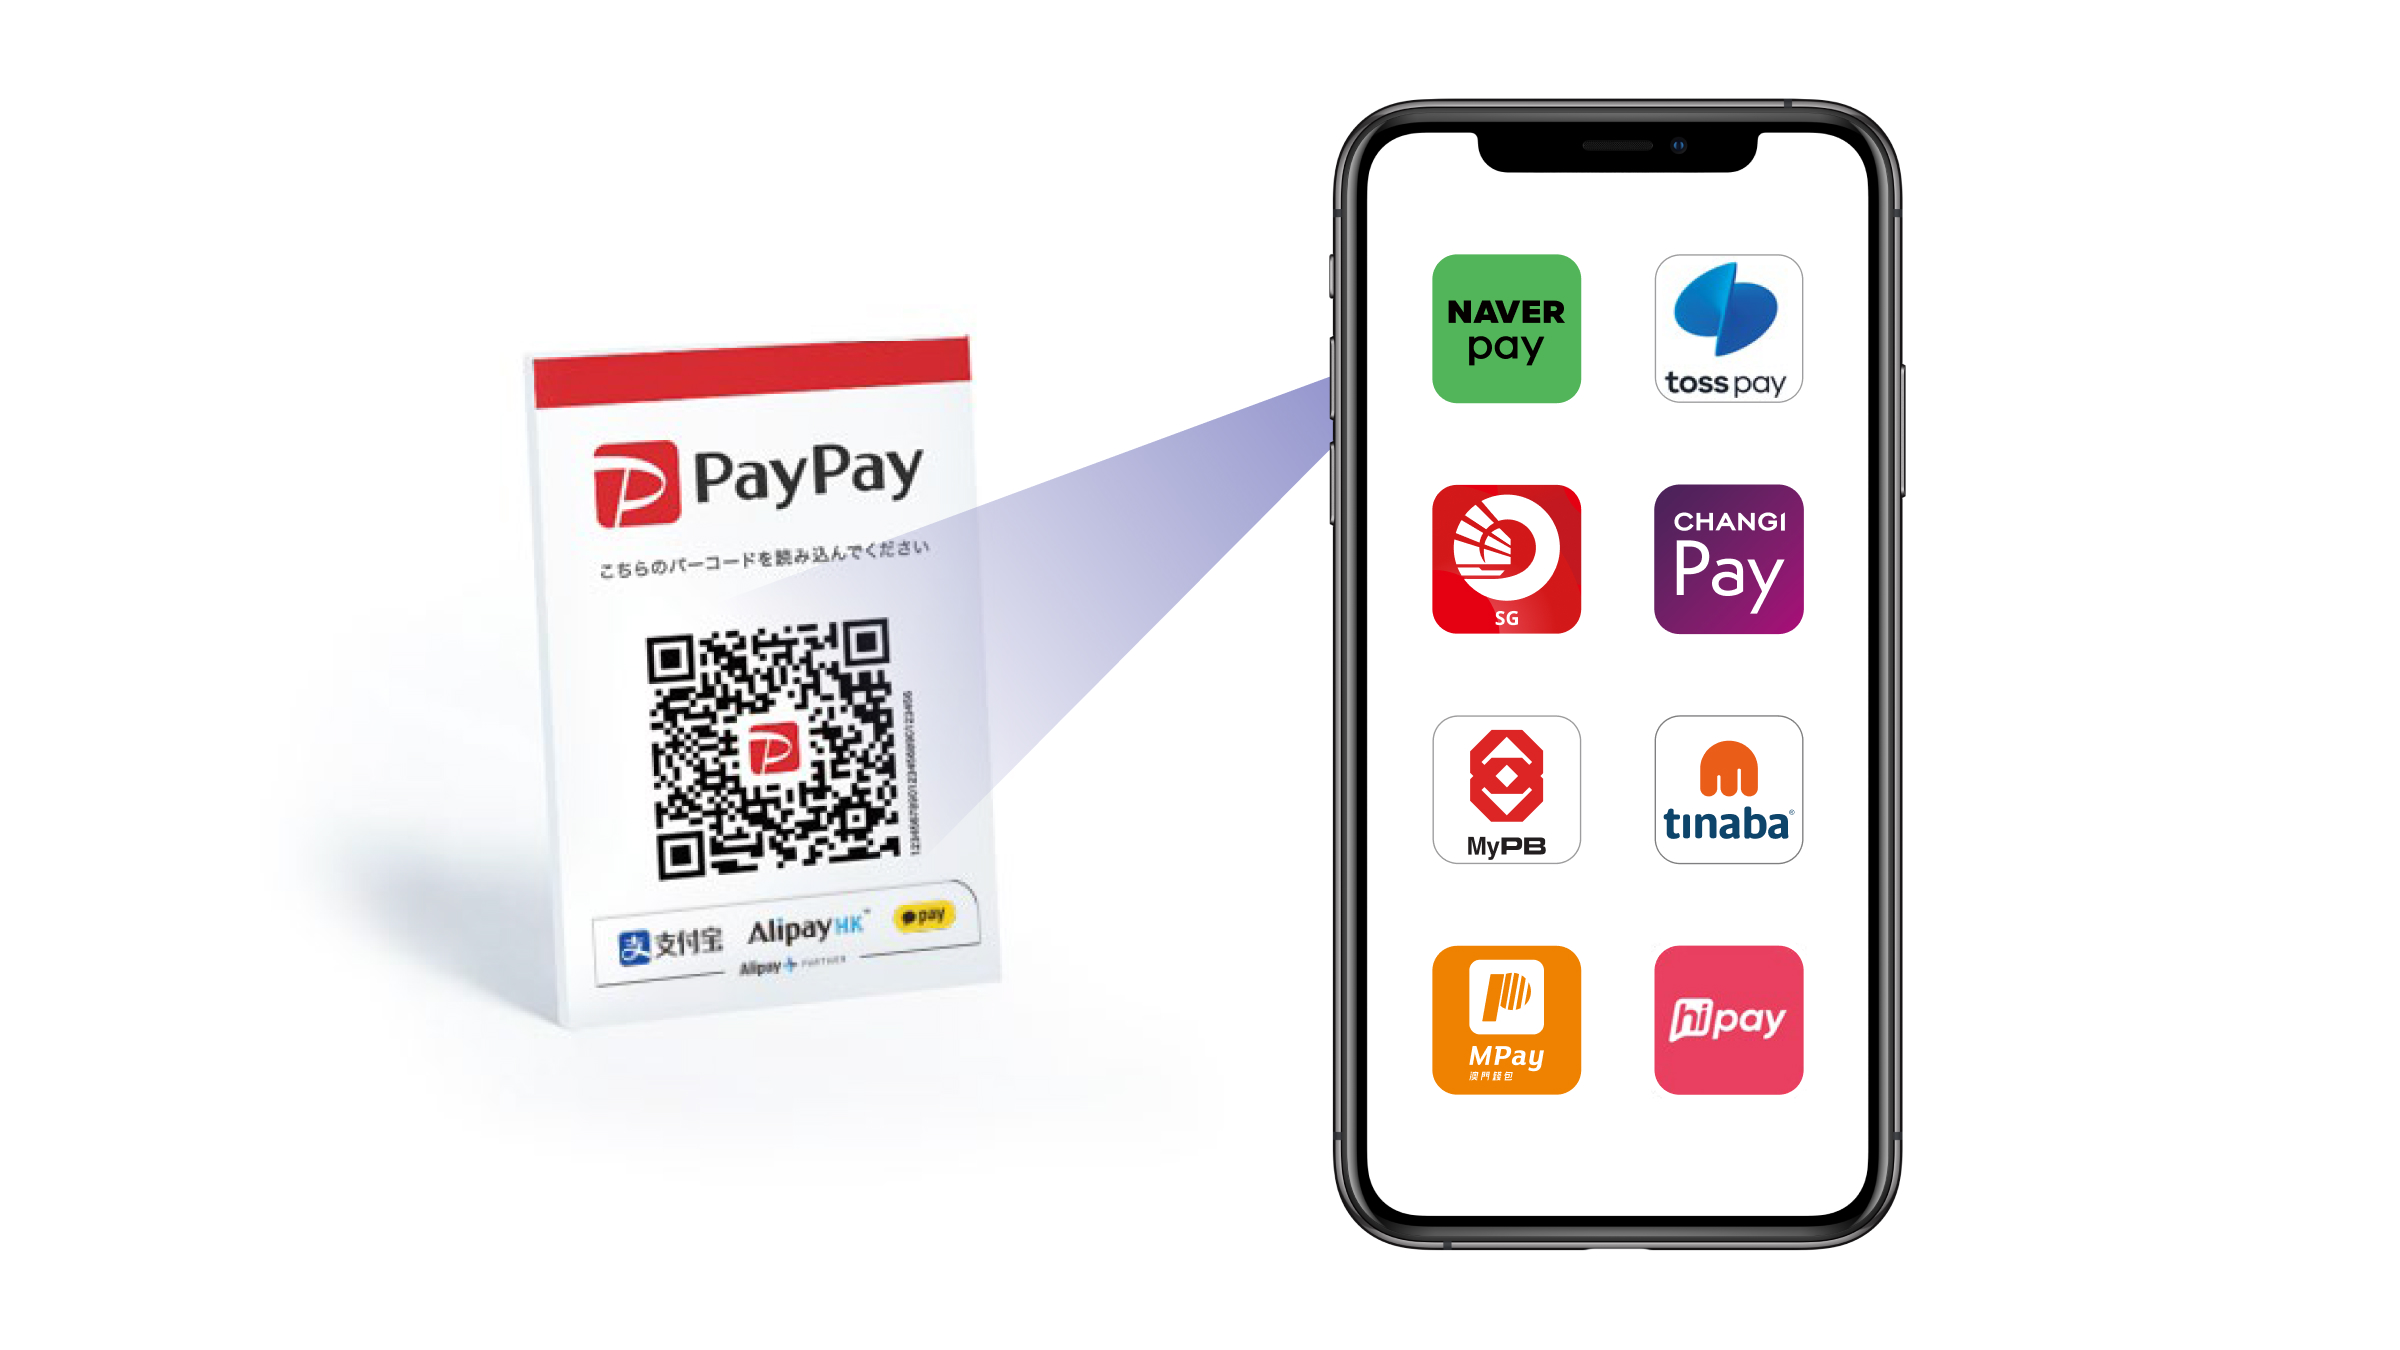 cashless payment that PayPay supports